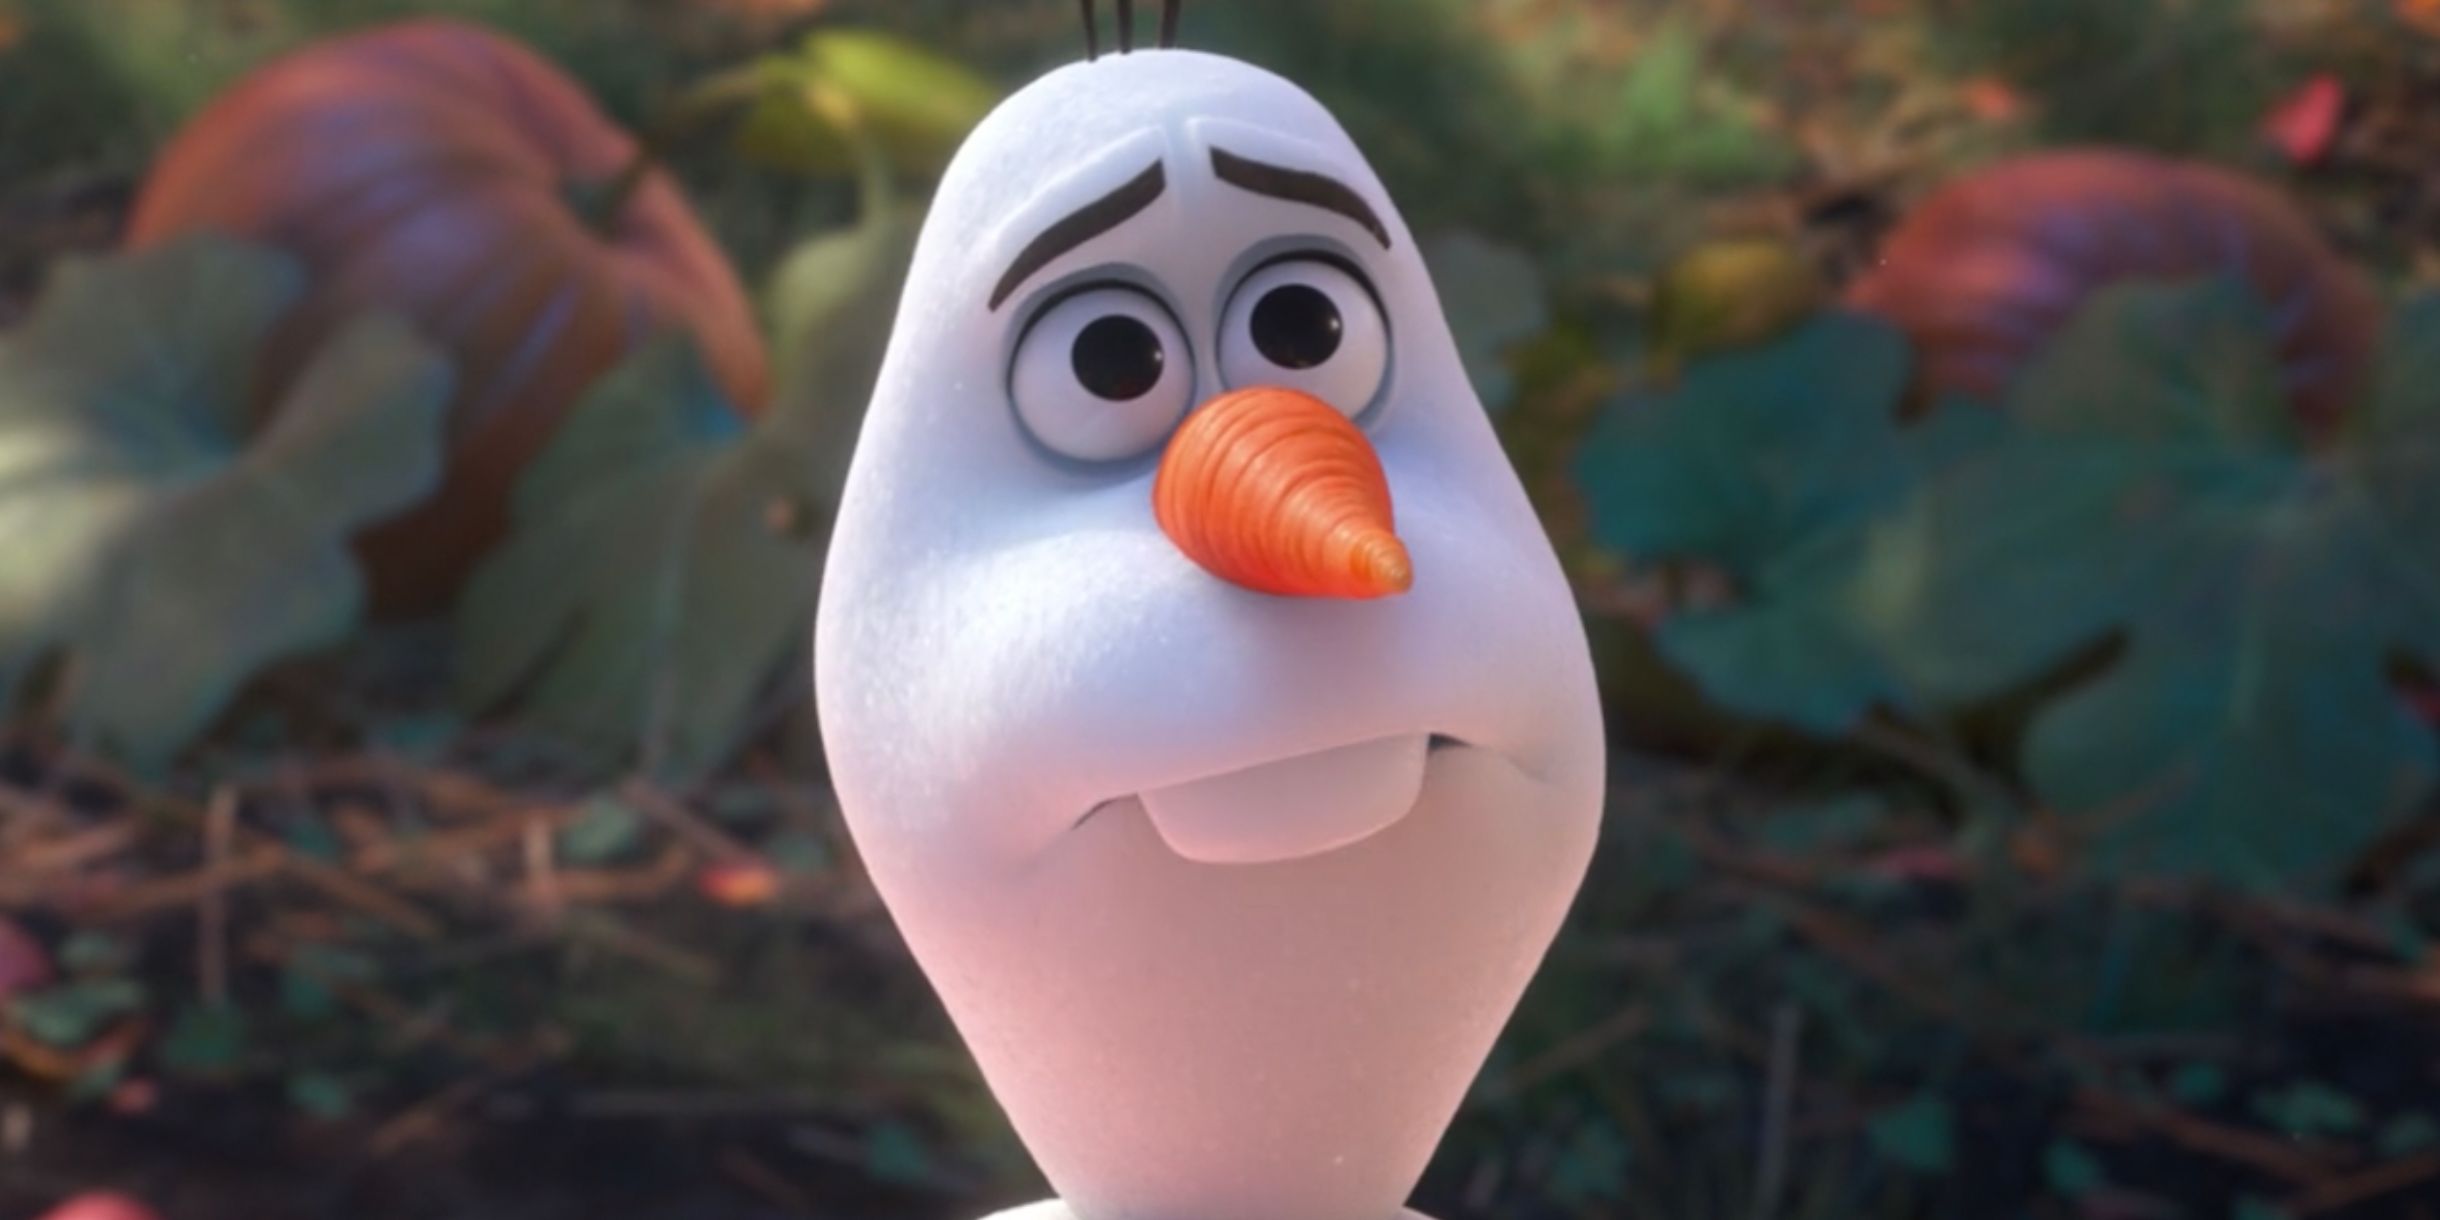 Olaf the snowman (voiced by Josh Gad) thinking in Frozen